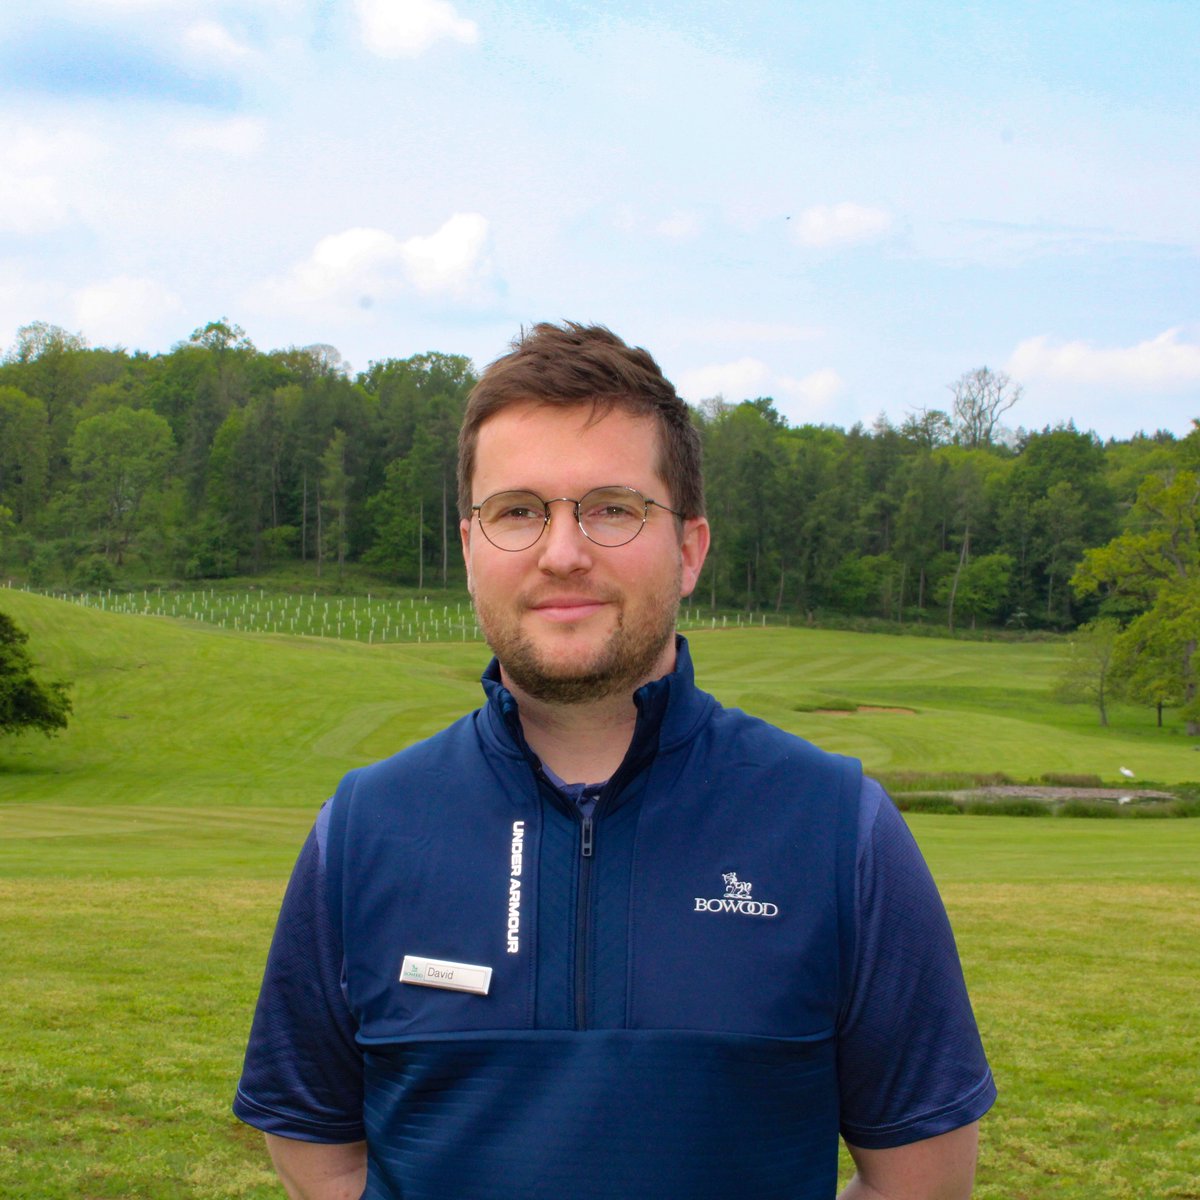 Congratulations to David Stone. who has been appointed as the new golf operations and retail manager at Bowood Hotel, Spa and Golf Resort in Wiltshire. David has previously worked for the Tony Valentine Golf Centre, Saltford Golf Club, TaylorMade Golf Company, and Honma Golf Co